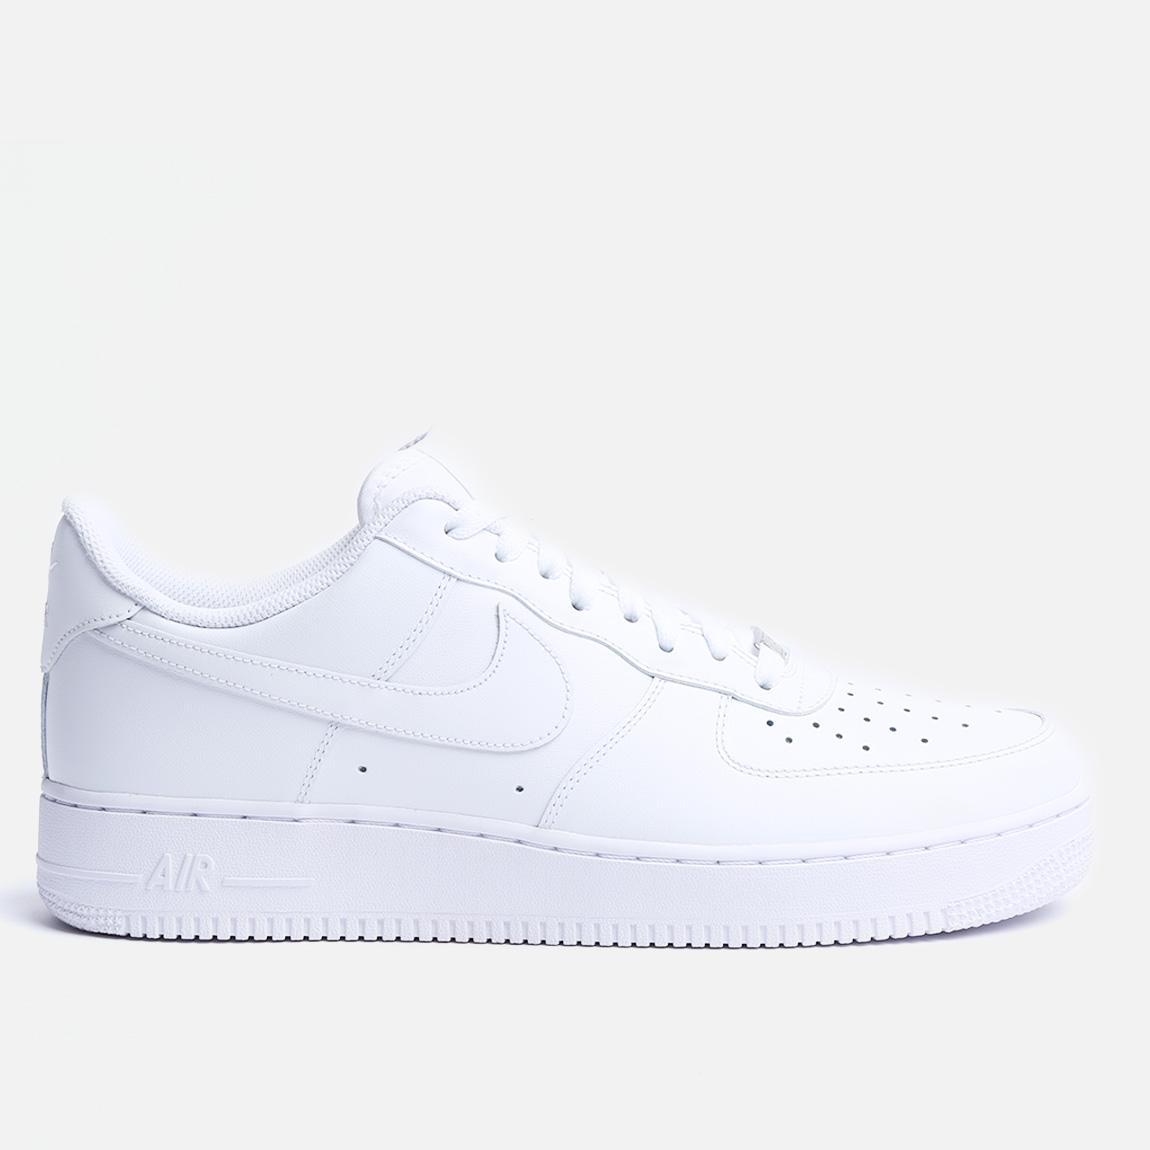 Air Force 1 Low - 315122-111 - White / White Nike Sneakers ...